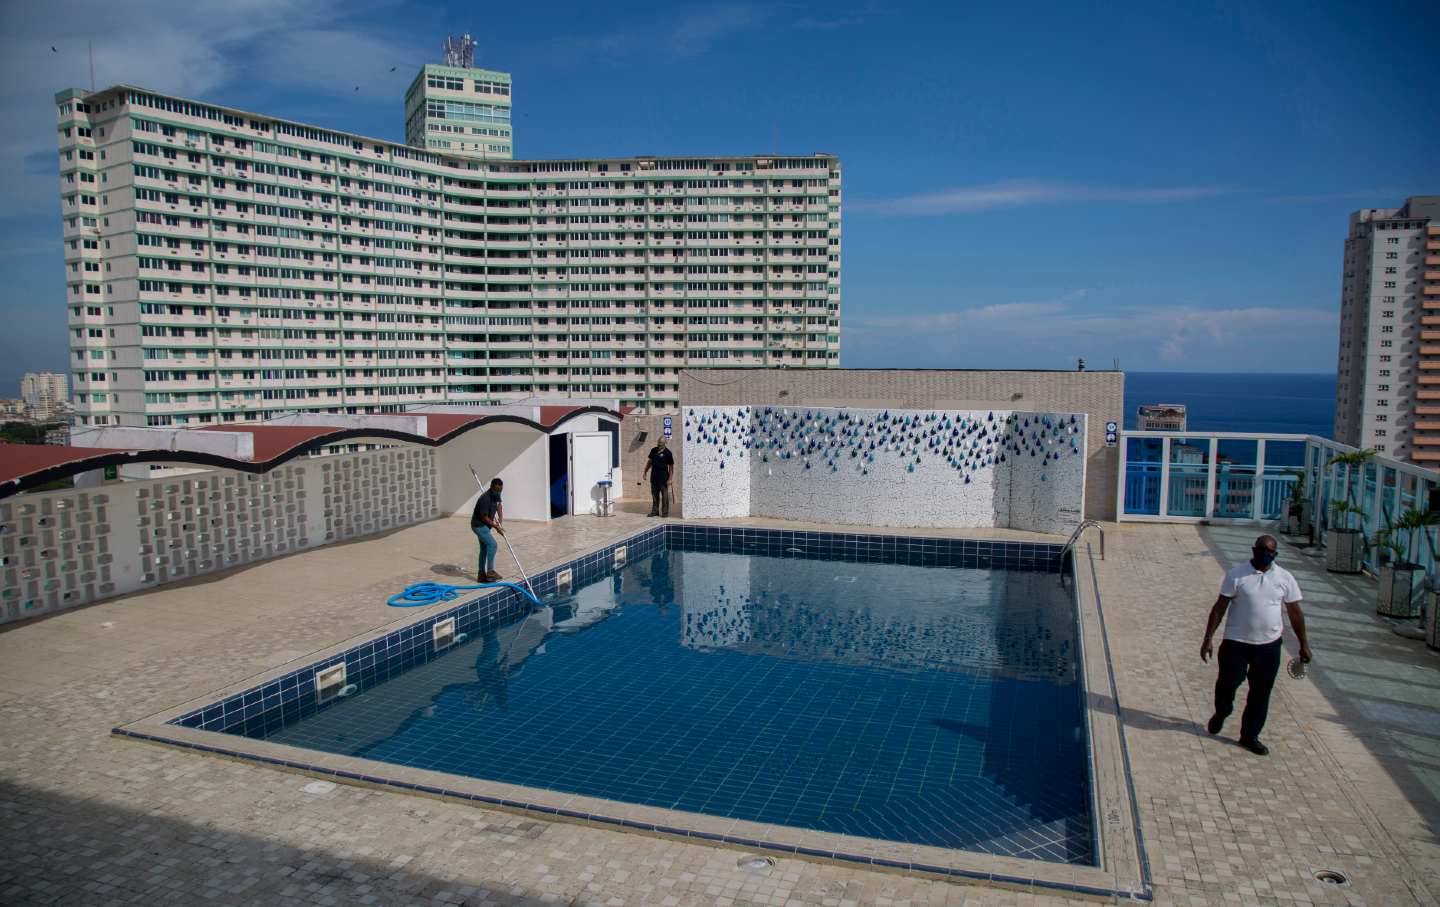 Workers clean a rooftop pool while a large building is seen in the background.